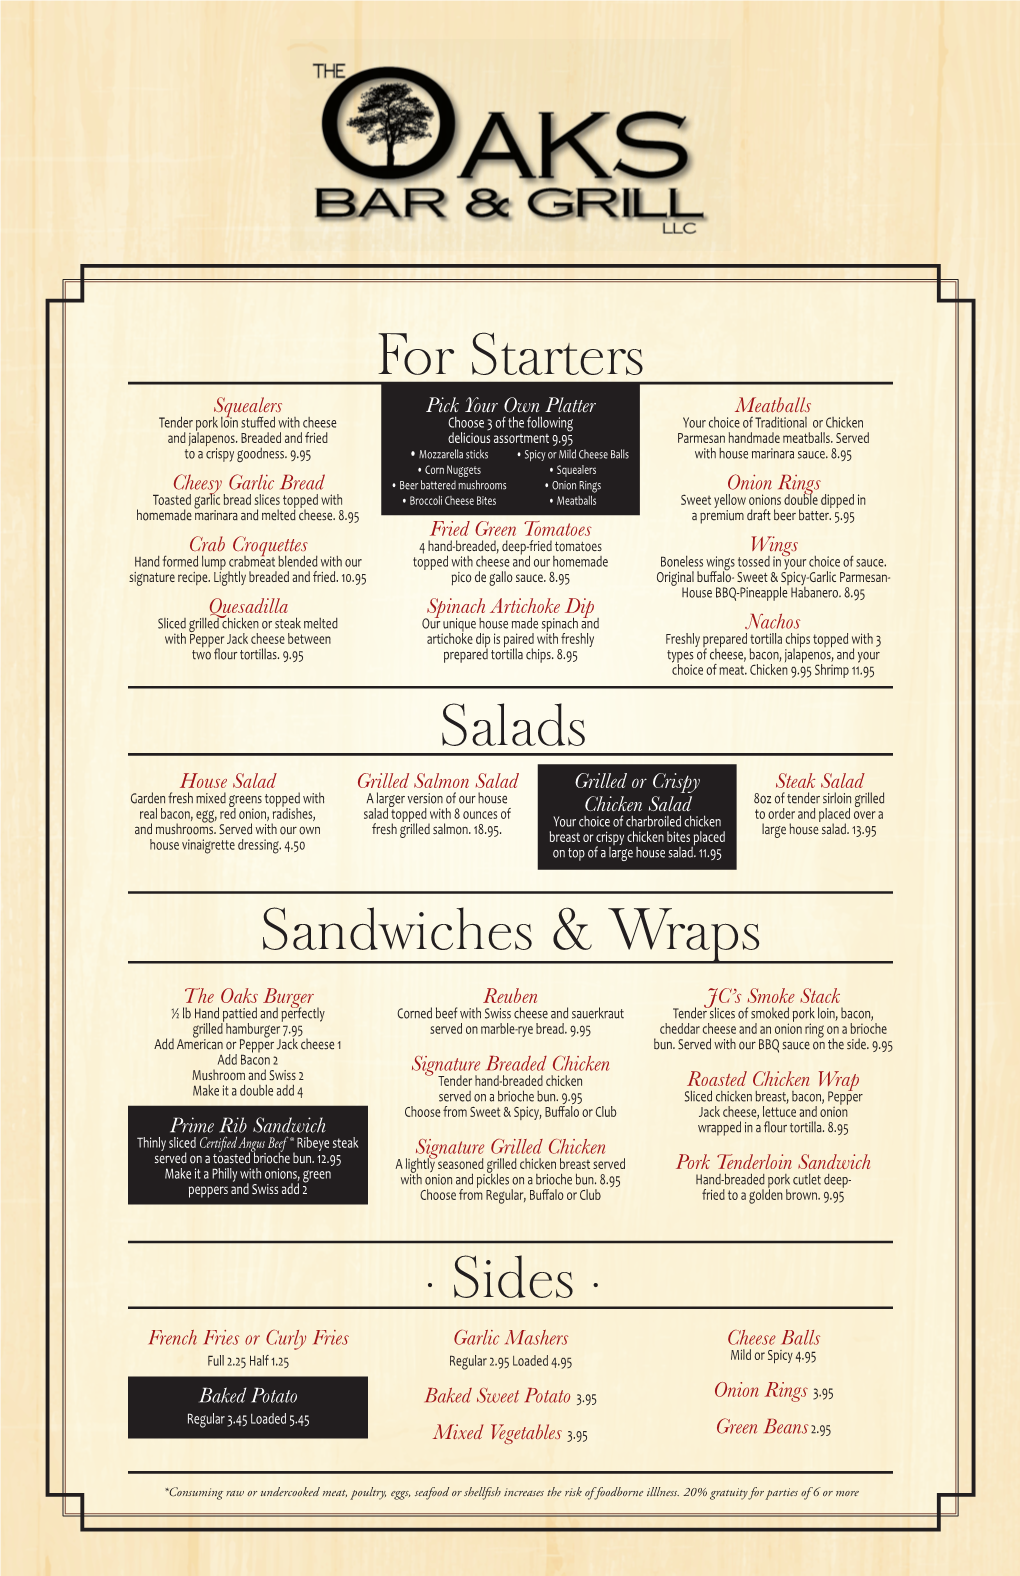 · Sides · Sandwiches & Wraps for Starters Salads